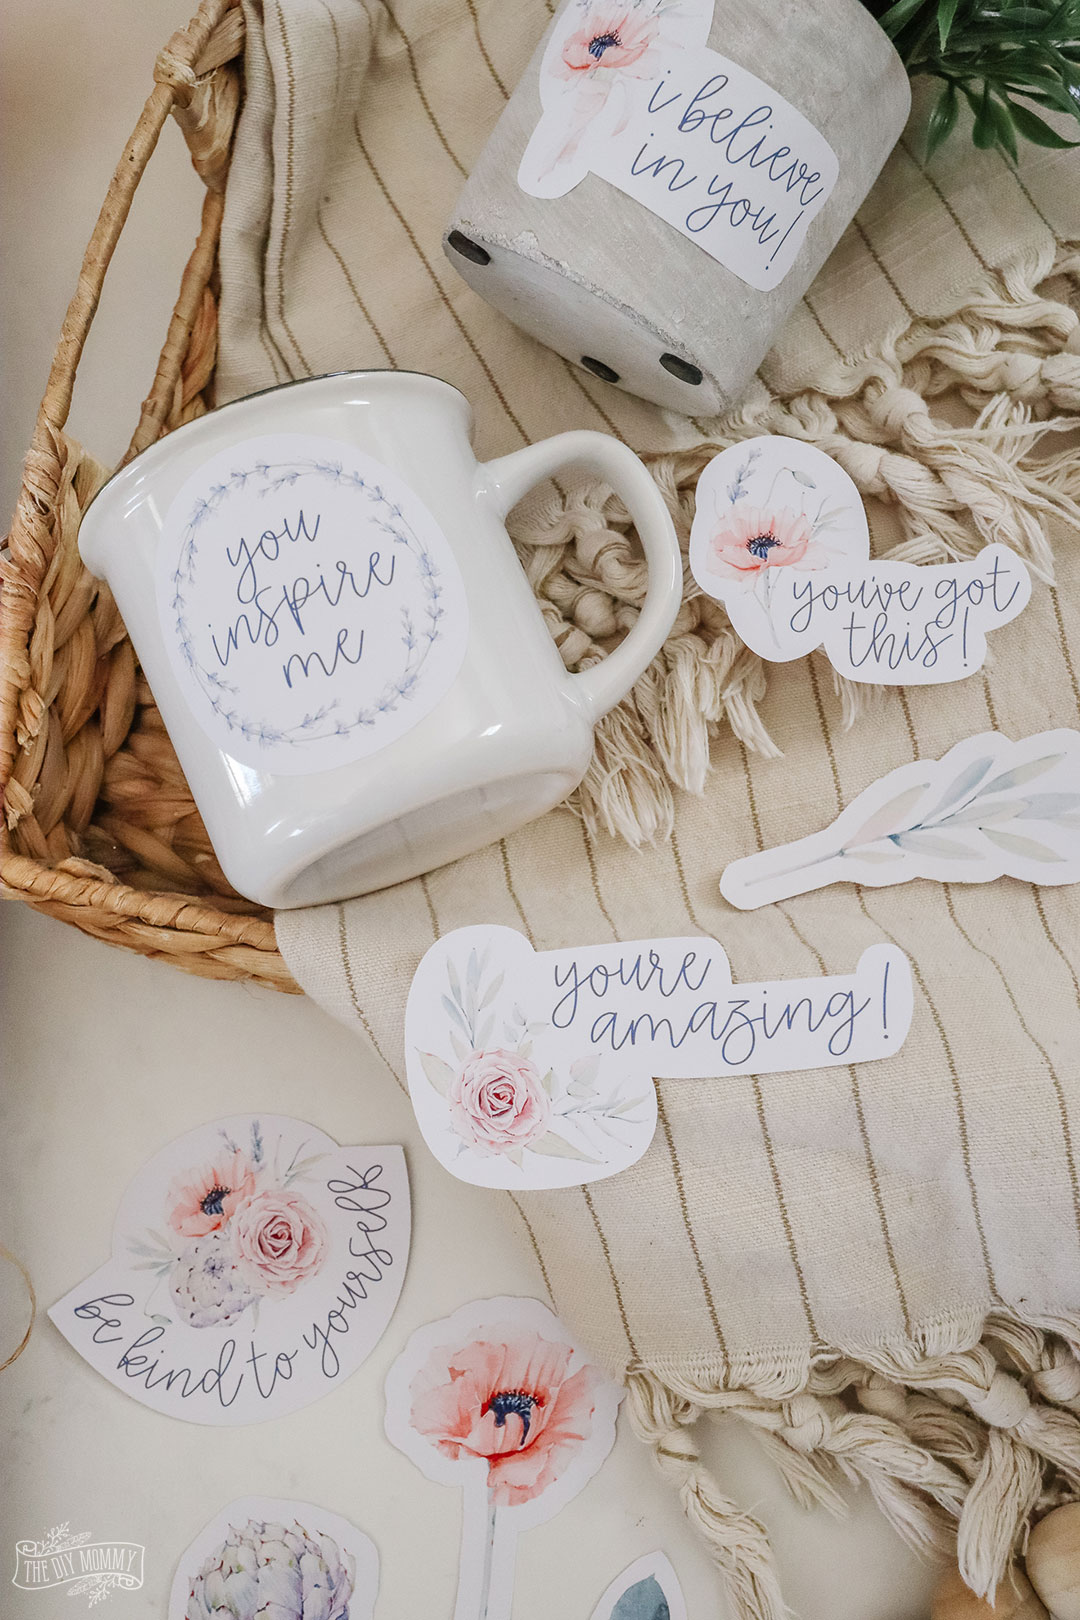 Learn how to make stickers with Cricut (or without!) and get free floral encouragement stickers to print and cut at home.